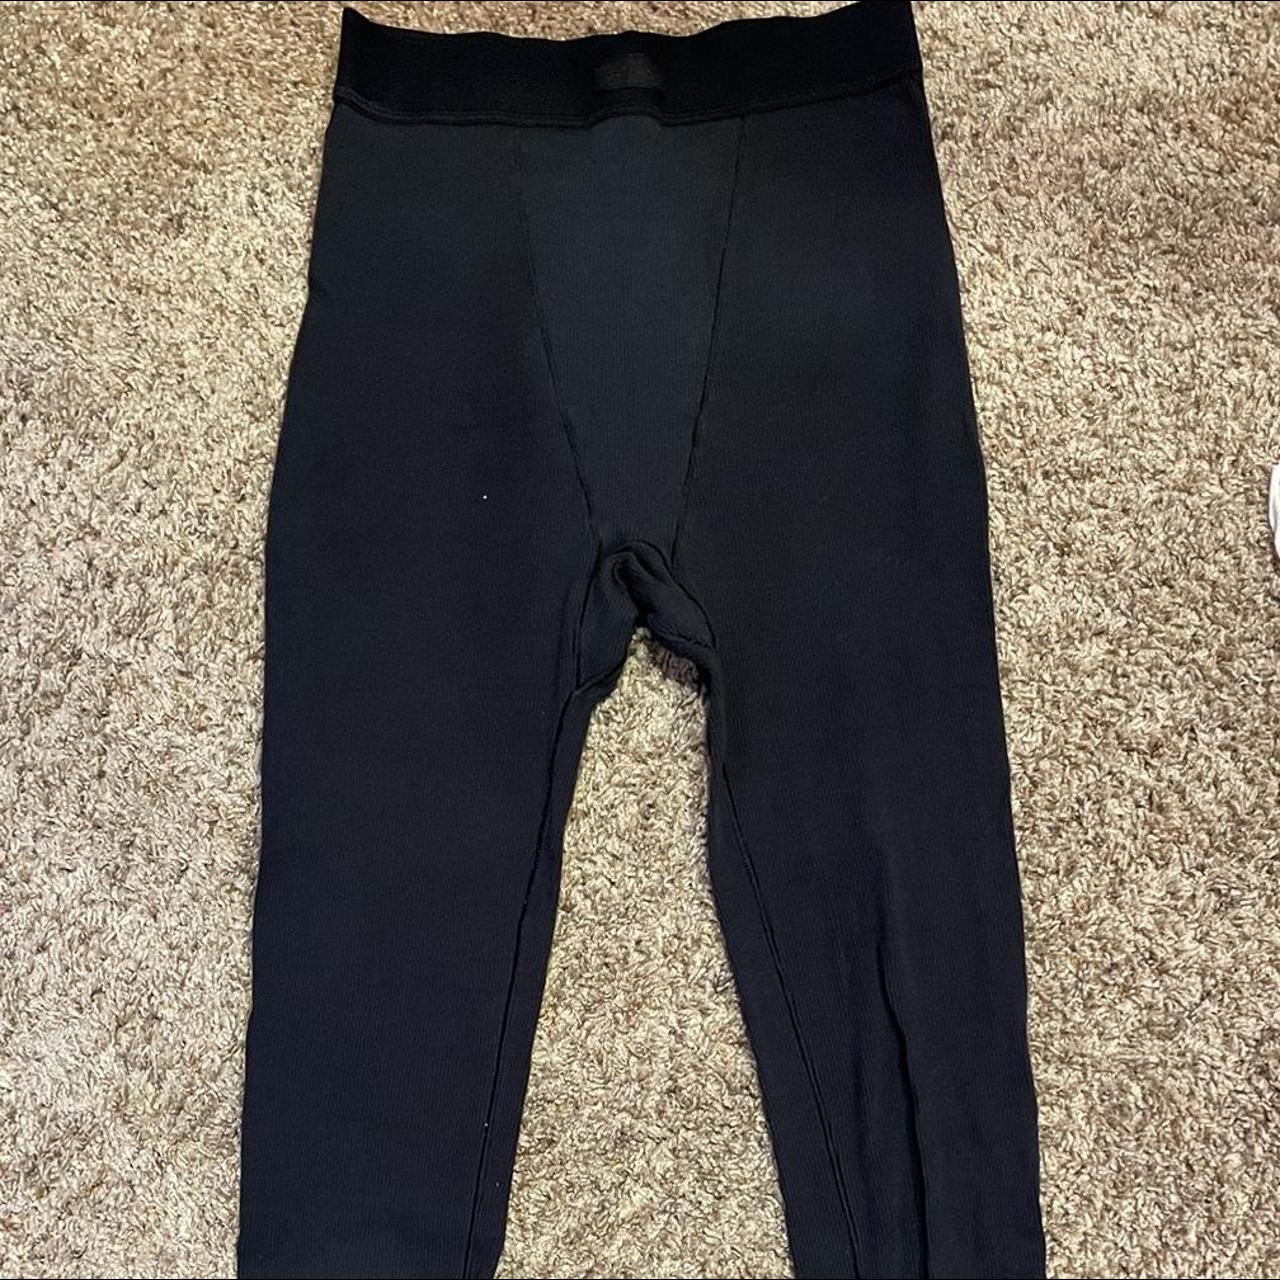 black skims leggings love these but too small - Depop